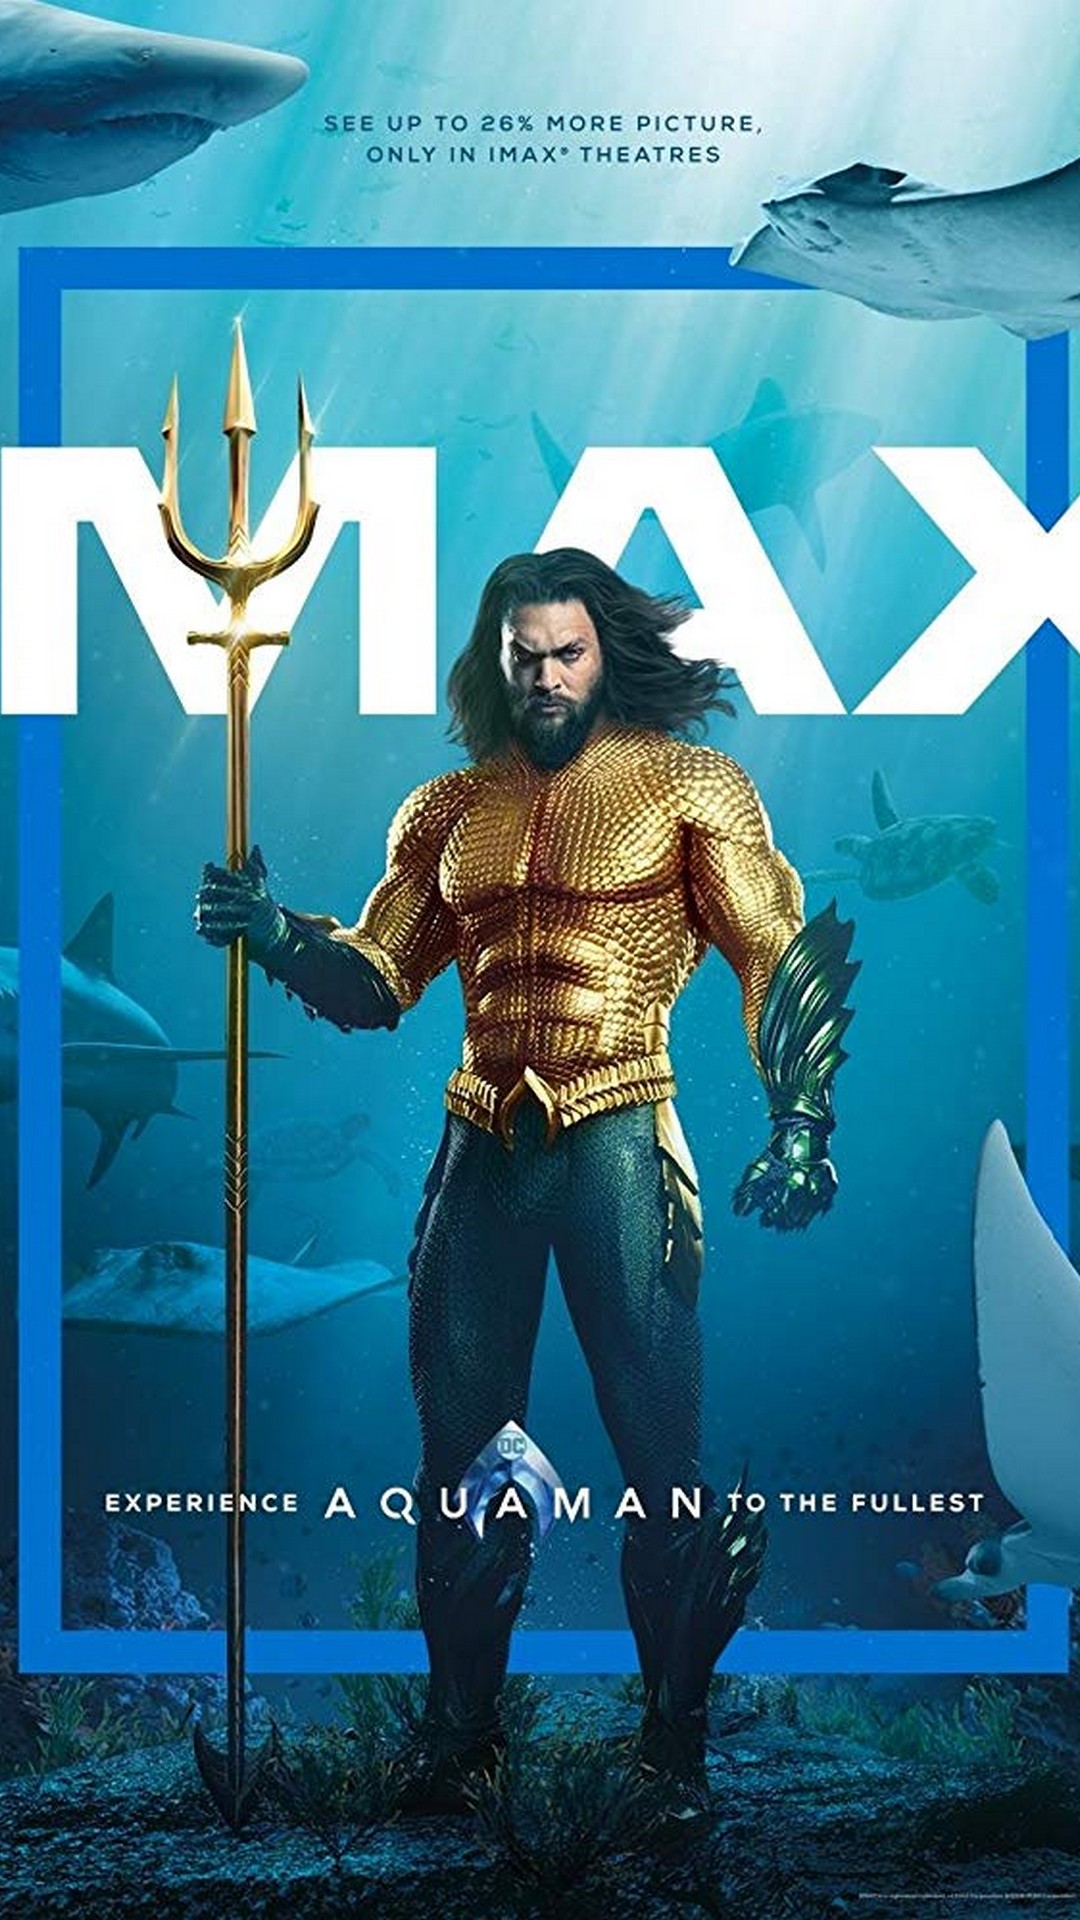 Aquaman 2018 iPhone Wallpaper With Resolution 1080X1920 pixel. You can make this wallpaper for your Mac or Windows Desktop Background, iPhone, Android or Tablet and another Smartphone device for free